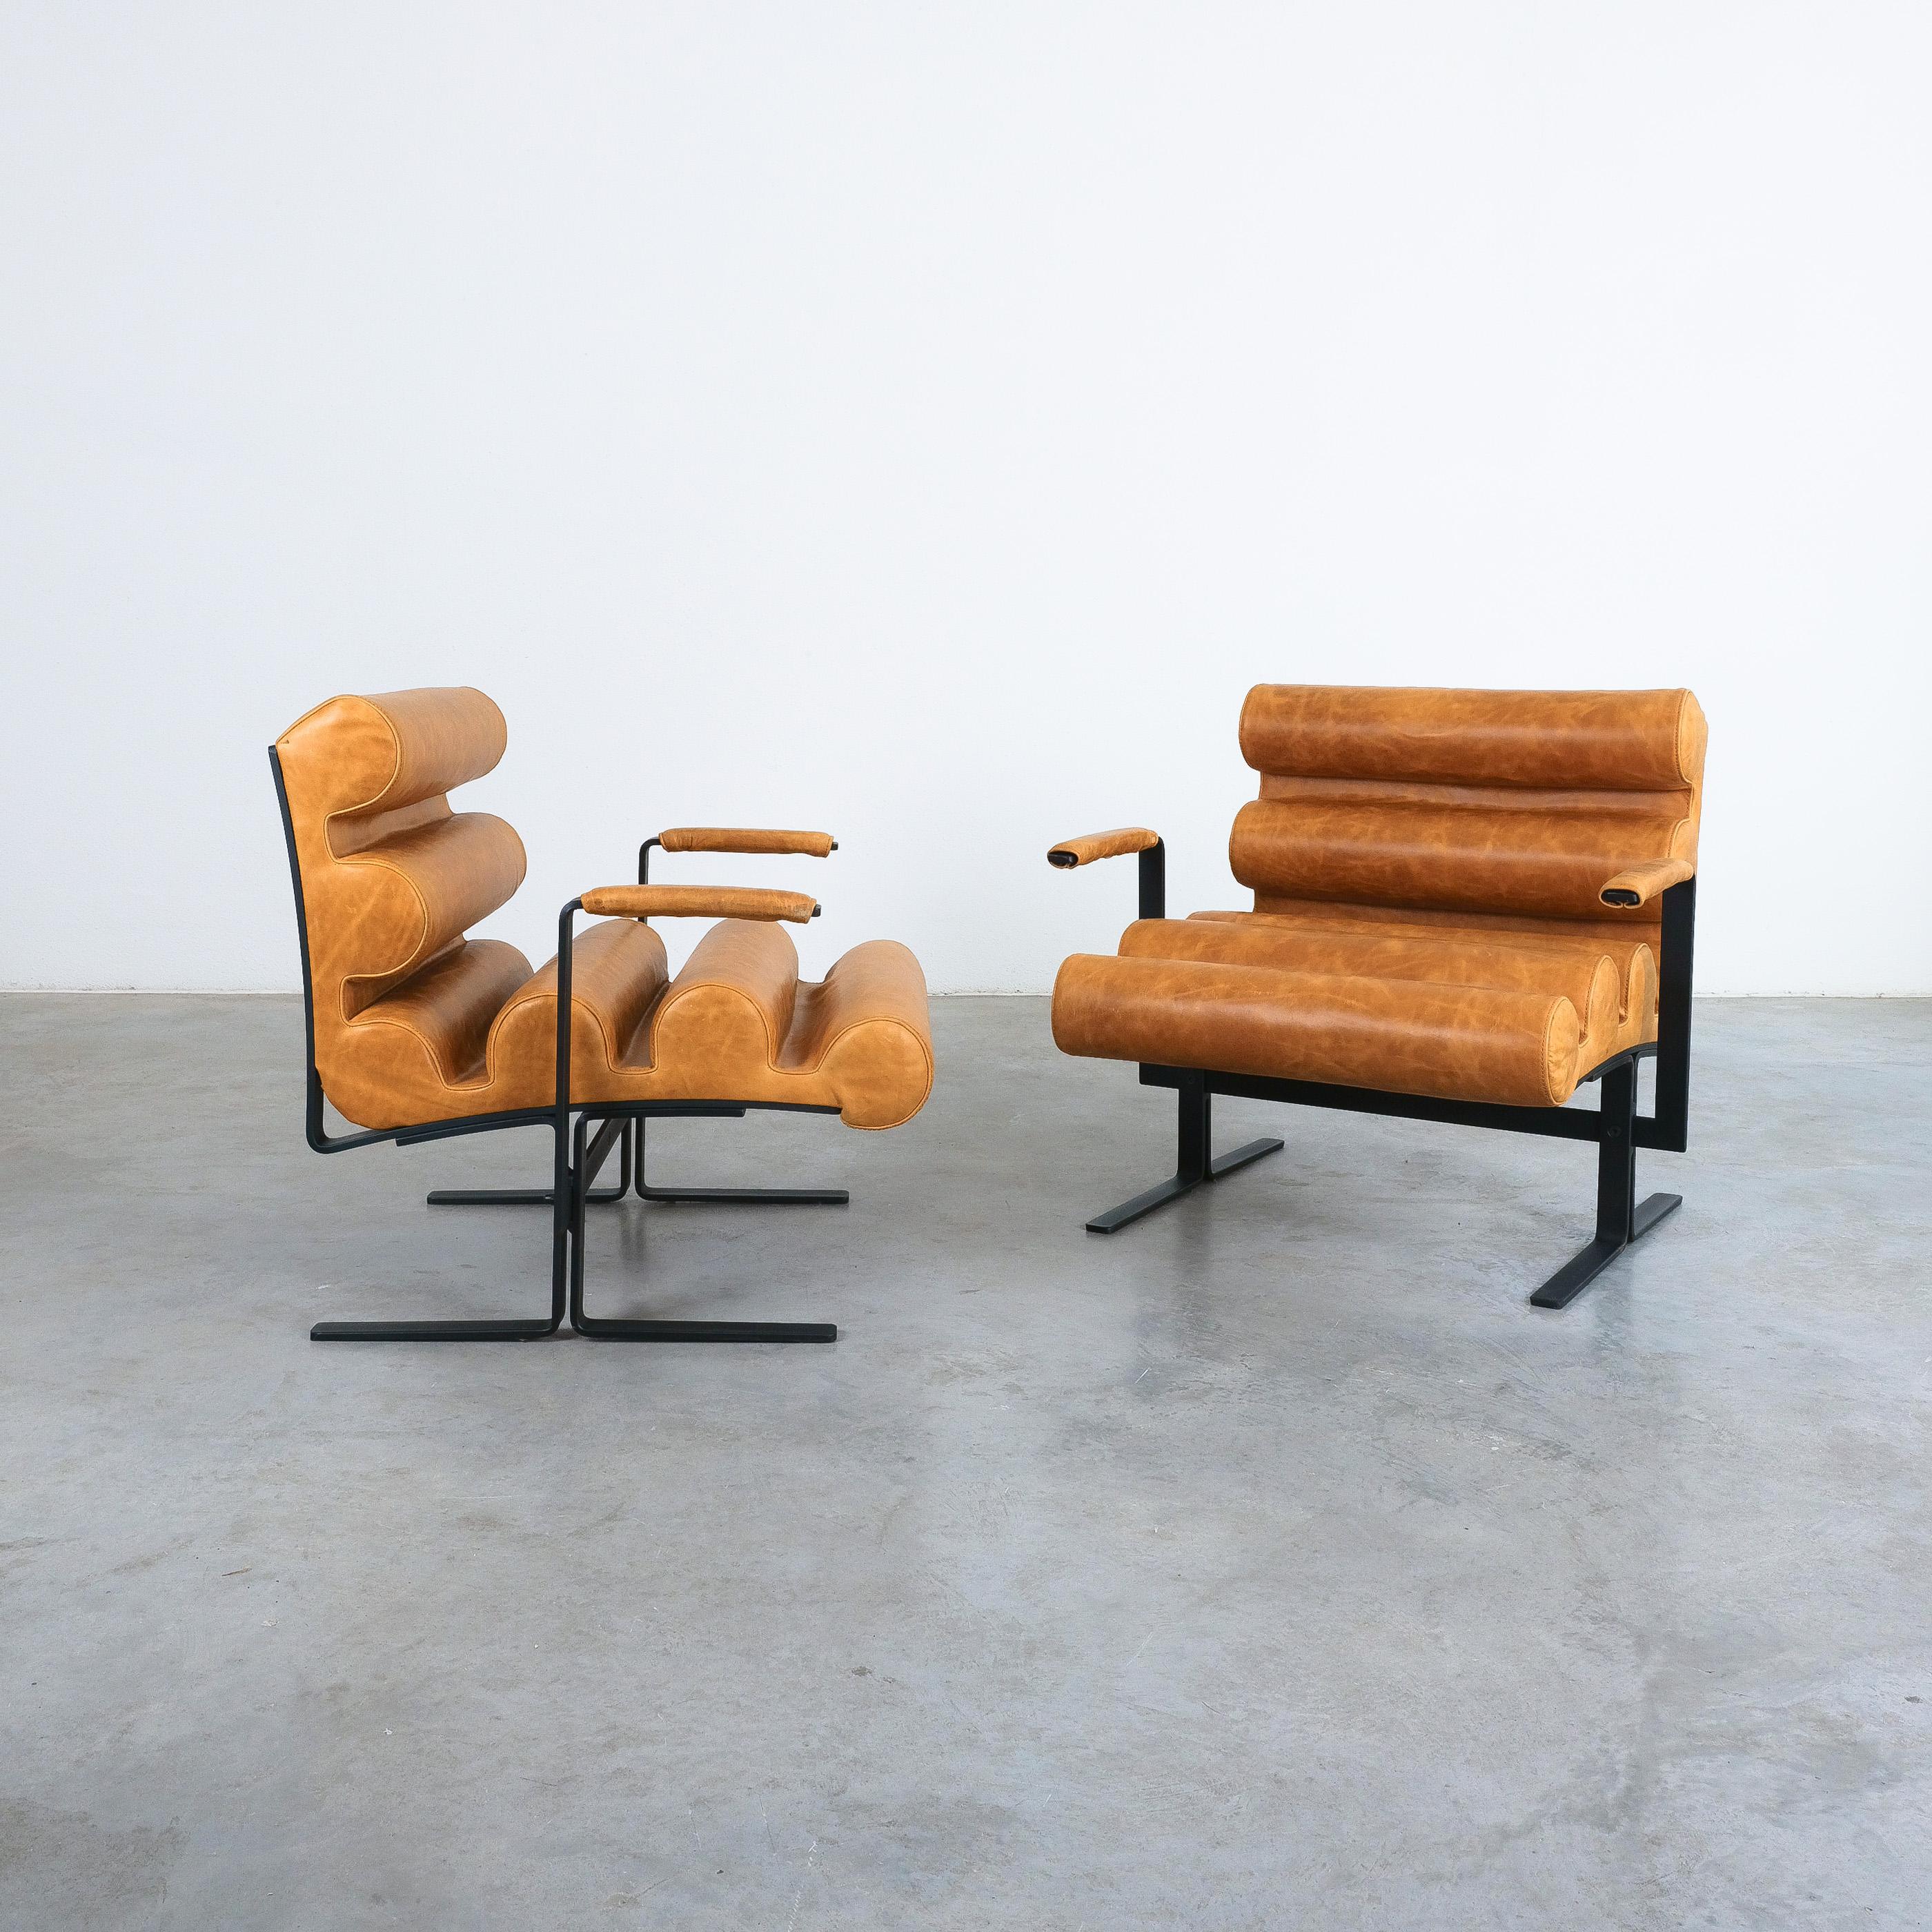 Joe Colombo For Sormani Roll Brown Leather Spring Steel Armchair Pair (2) , 1962 For Sale 7